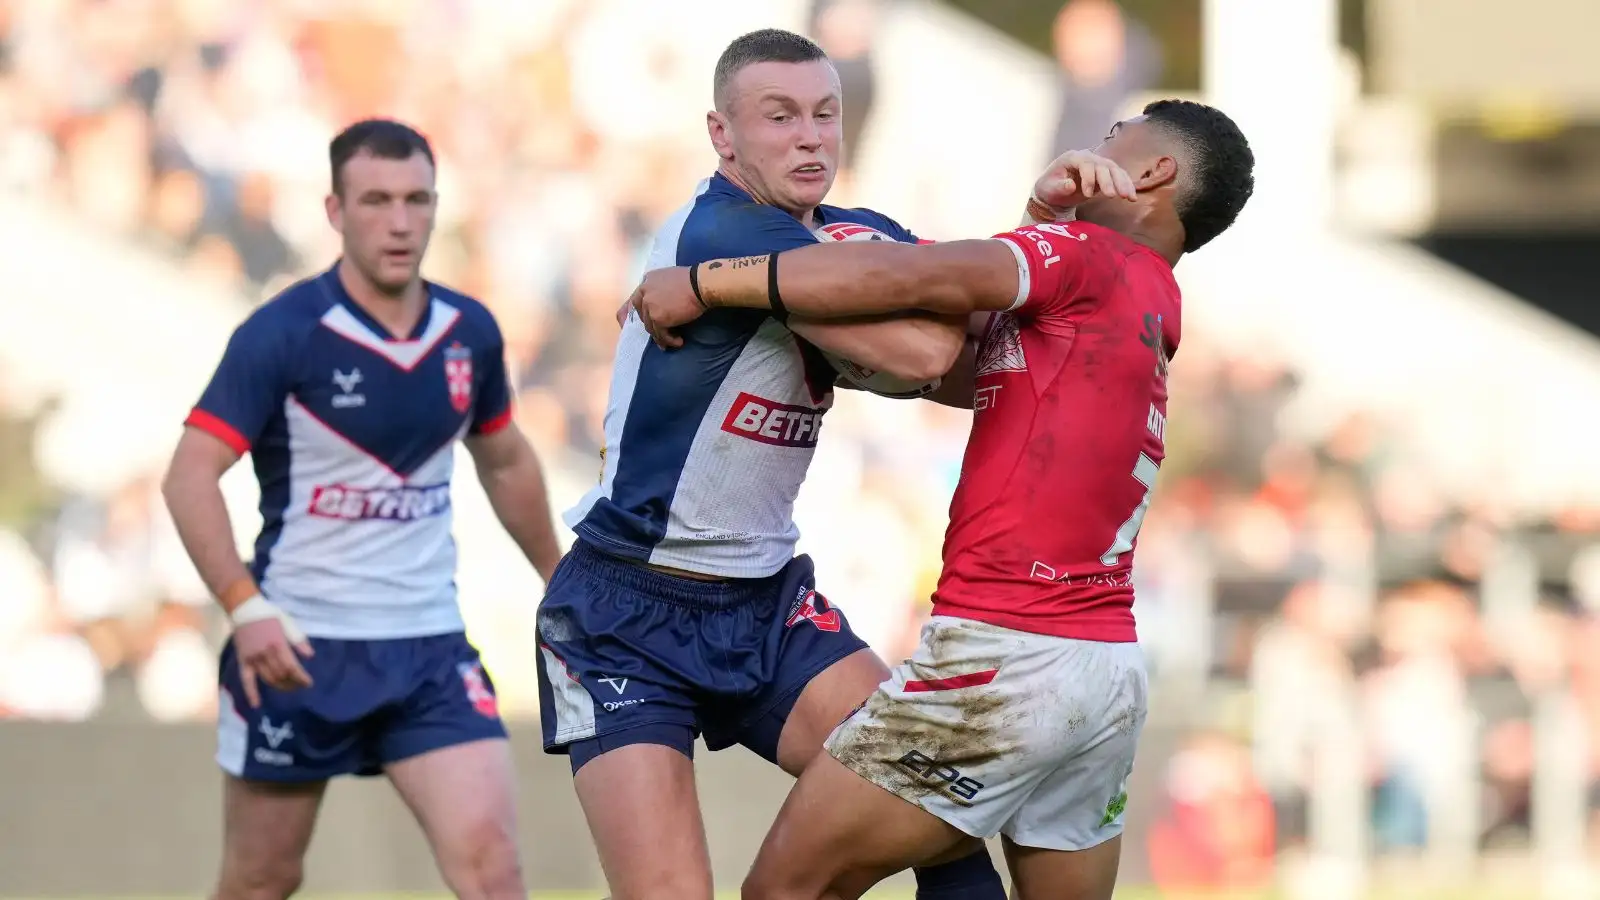 Leeds Rhinos starlet relishing final showdown with Tonga in familiar territory as England coach Shaun Wane admits disappointment in lack of Wigan test